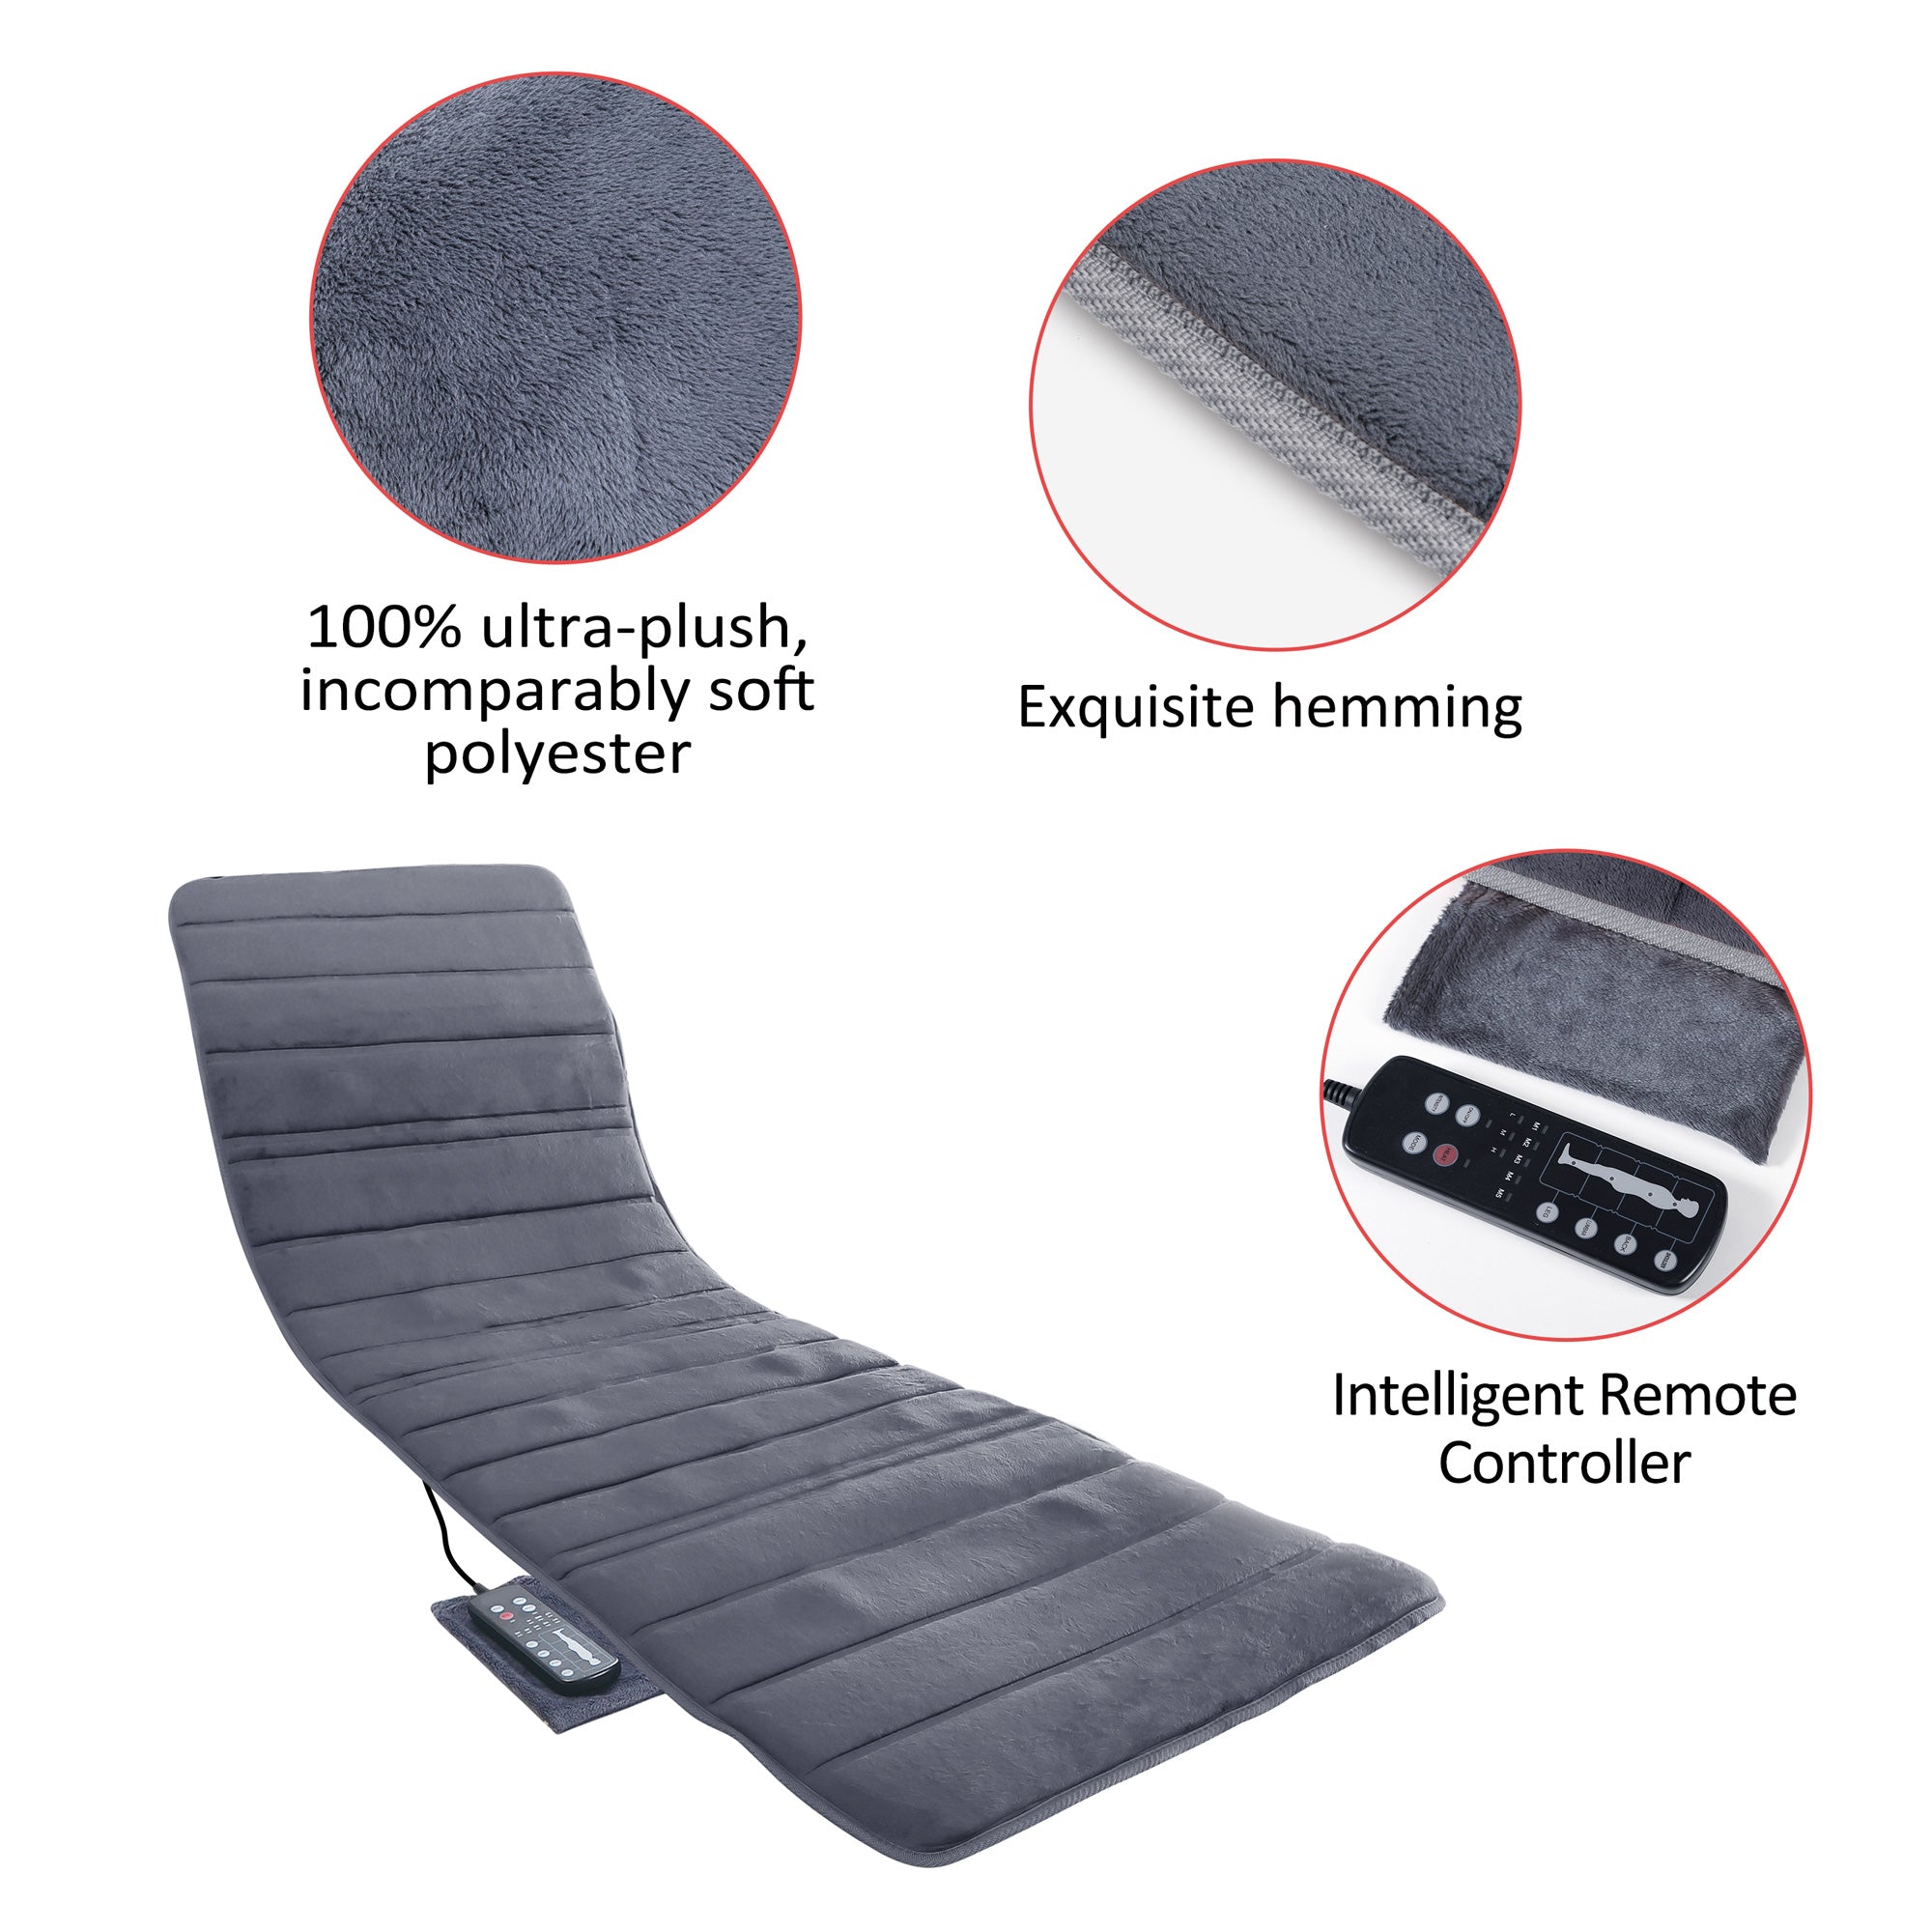 Comfier Full Body Massage Mat With Heat And Vibration Motors And 2 Therapy 3312